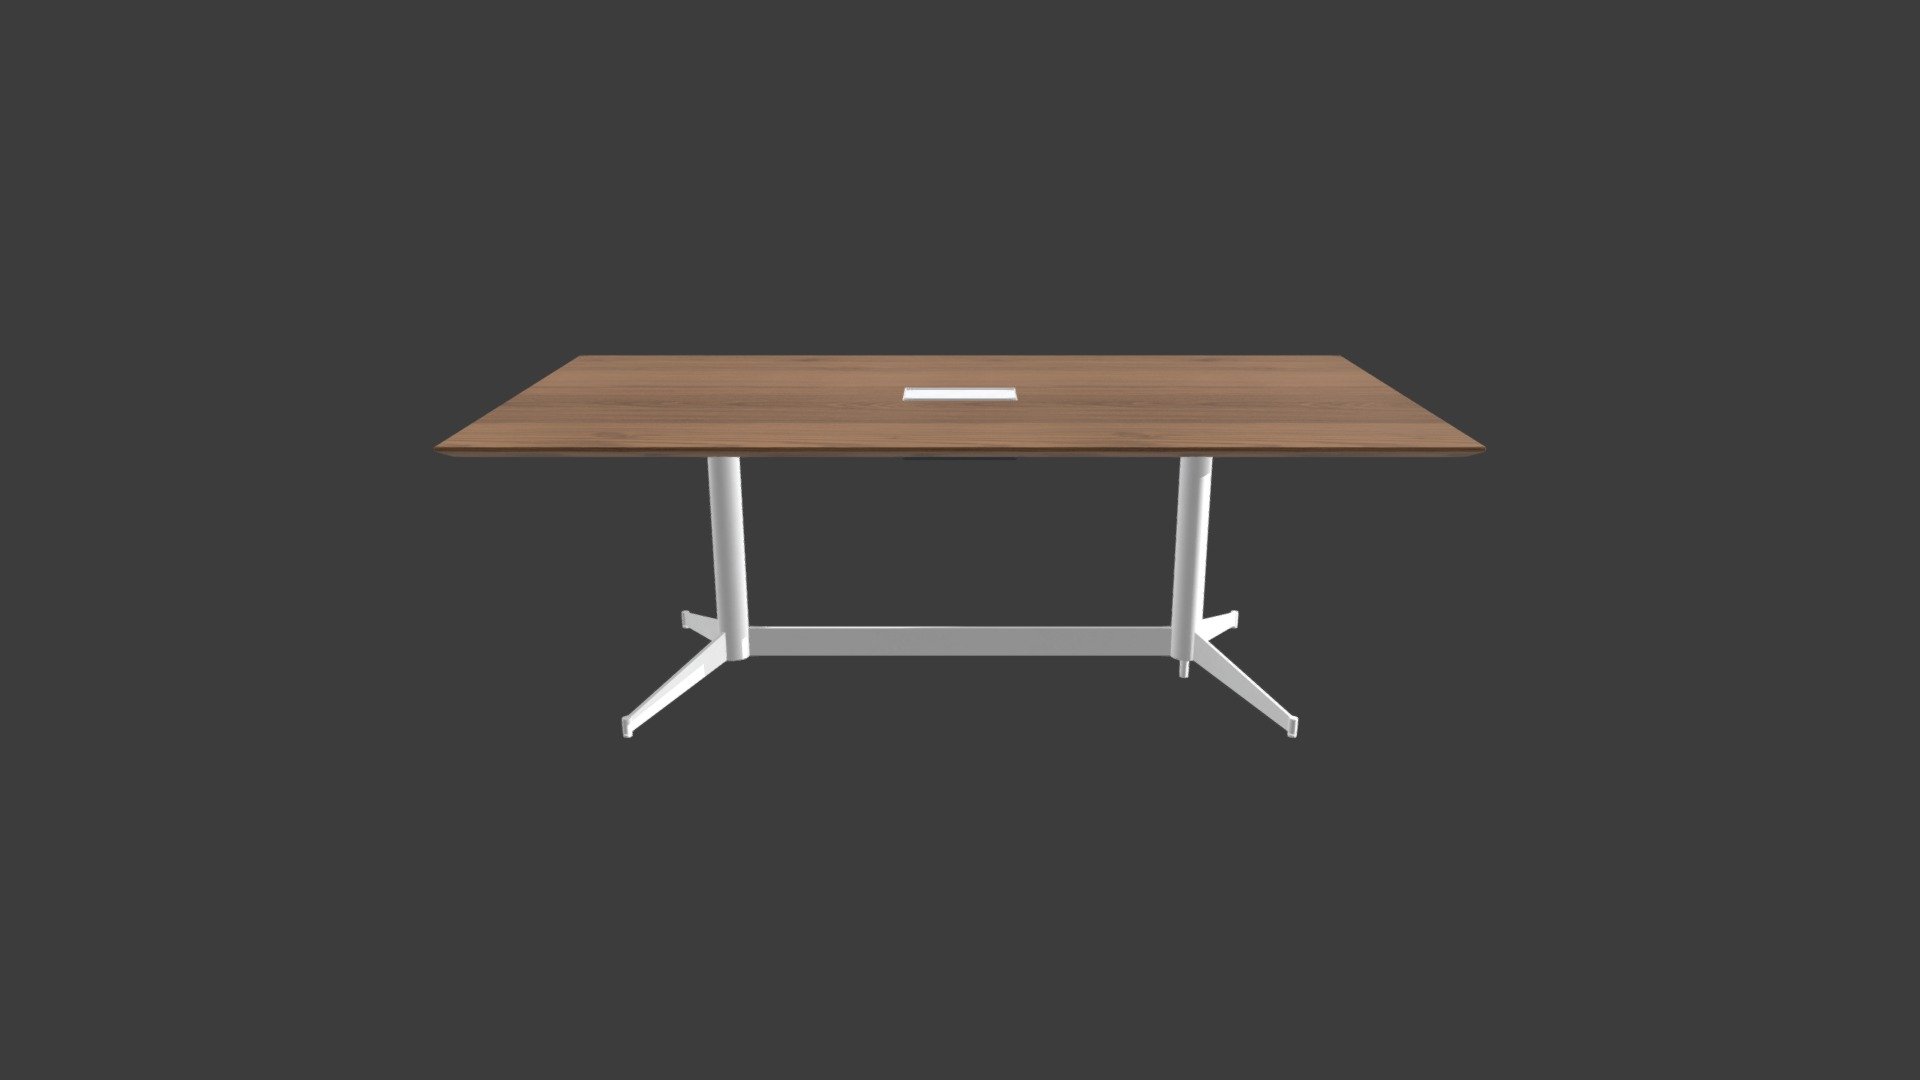 Brand &amp; Name: Geiger Mp Table 213 Incl. High detailed and optimized model for usage in photorealistic environments, architecture, vr and game ready. Baked PBR shaders &amp; textures in high texel density. Element IDs for easy shader customization - Geiger Mp Table 213 Incl - Buy Royalty Free 3D model by TMRWinc 3d model